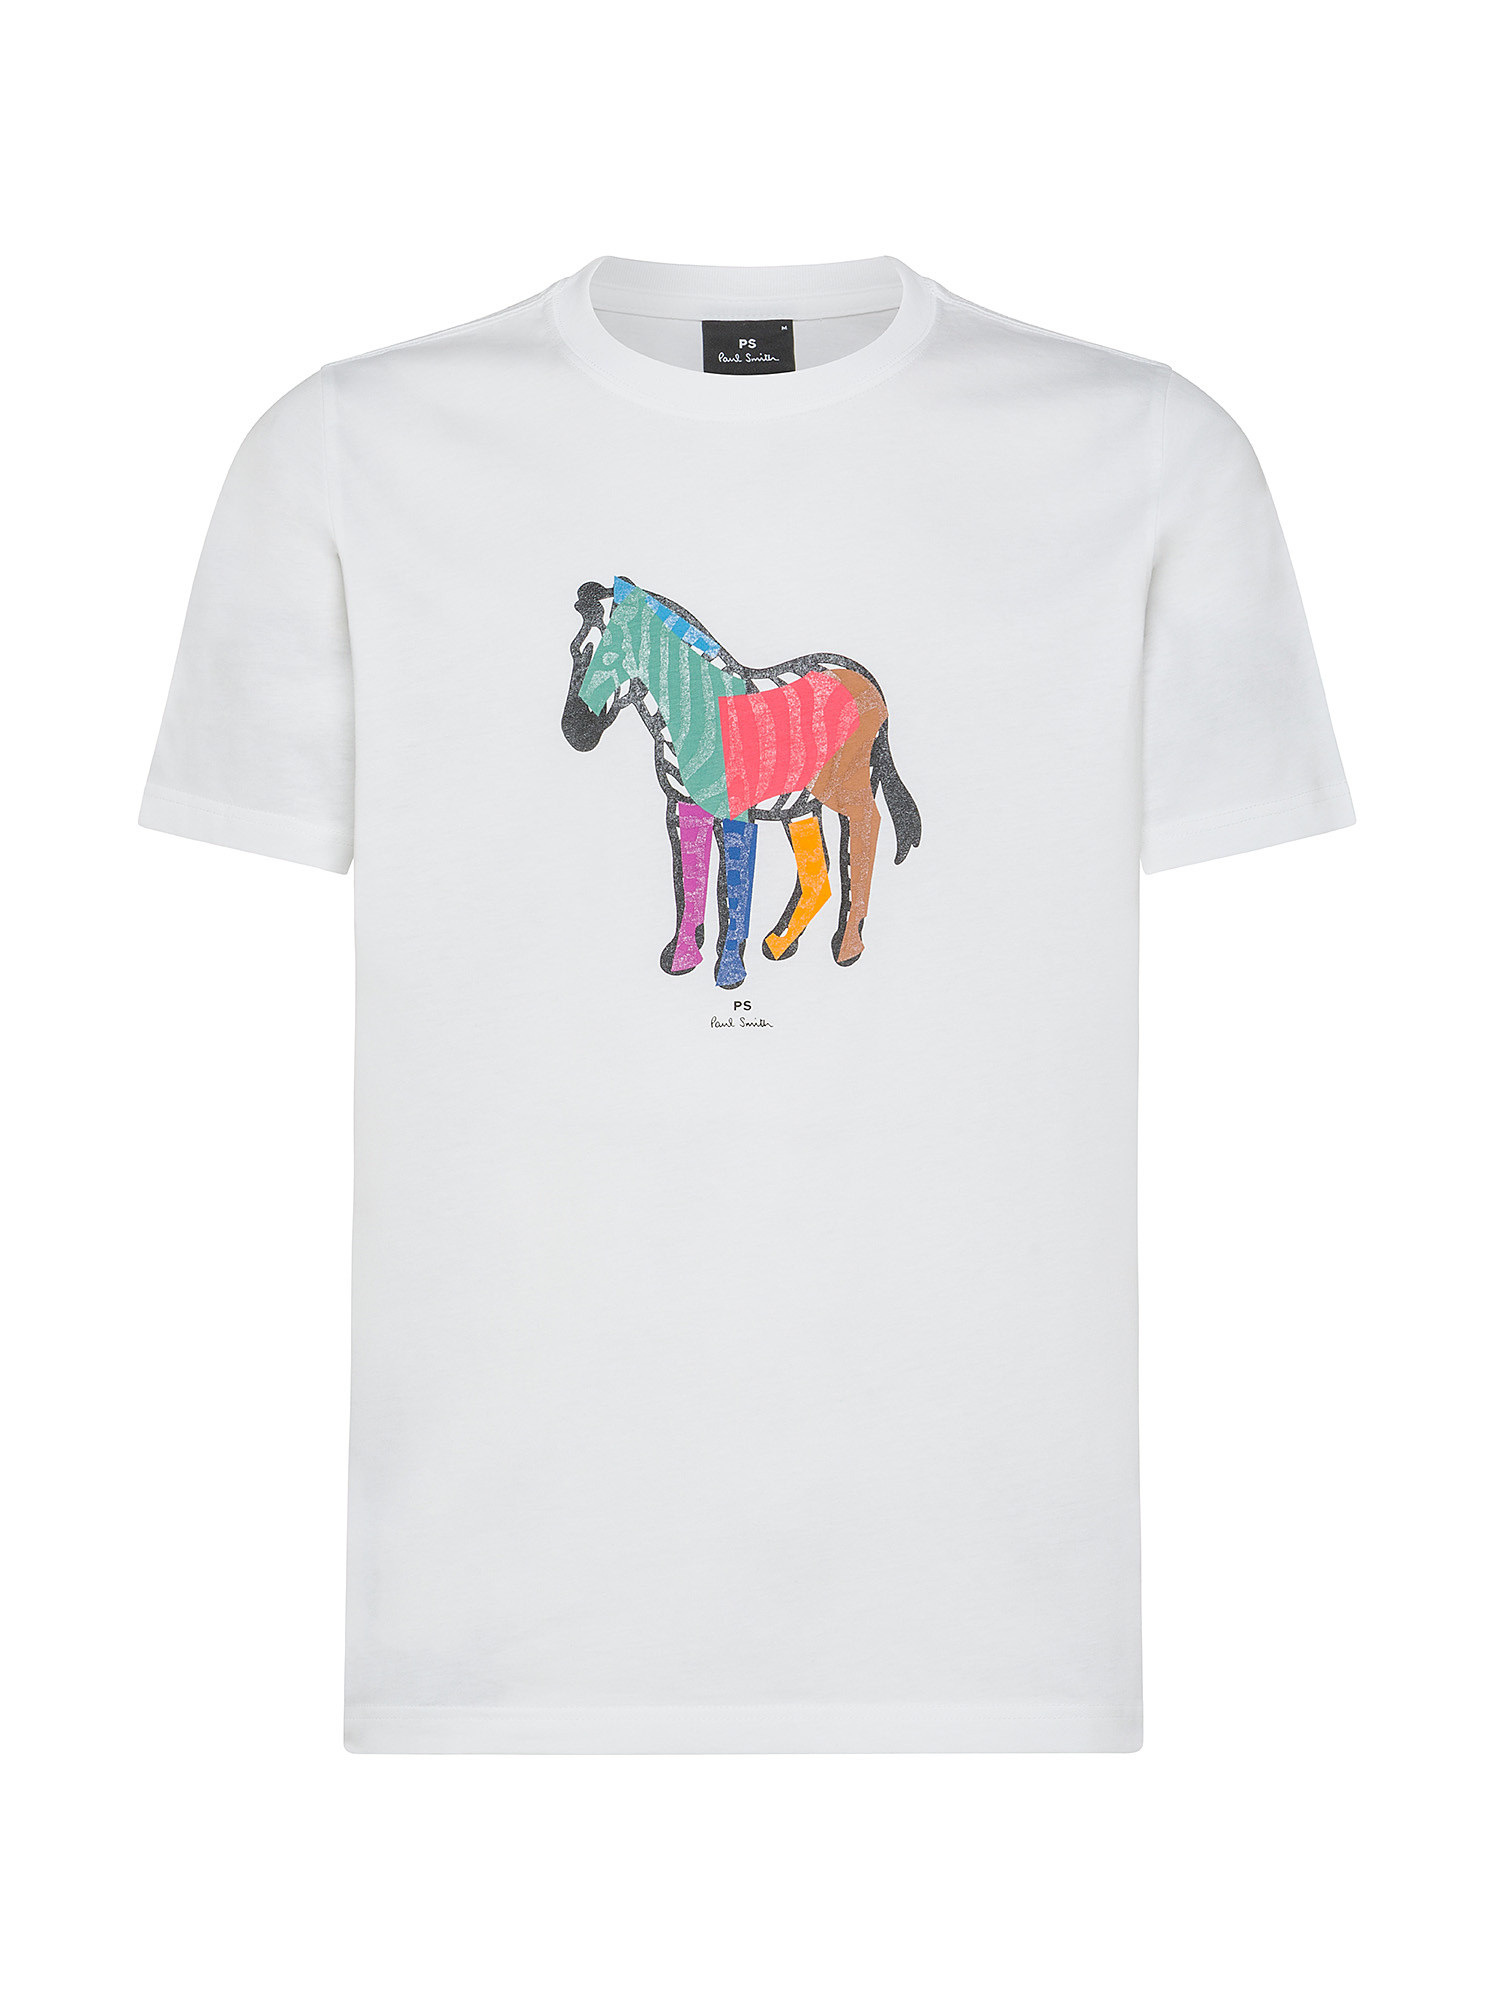 Paul Smith - Cotton T-shirt with Zebra print, White, large image number 0